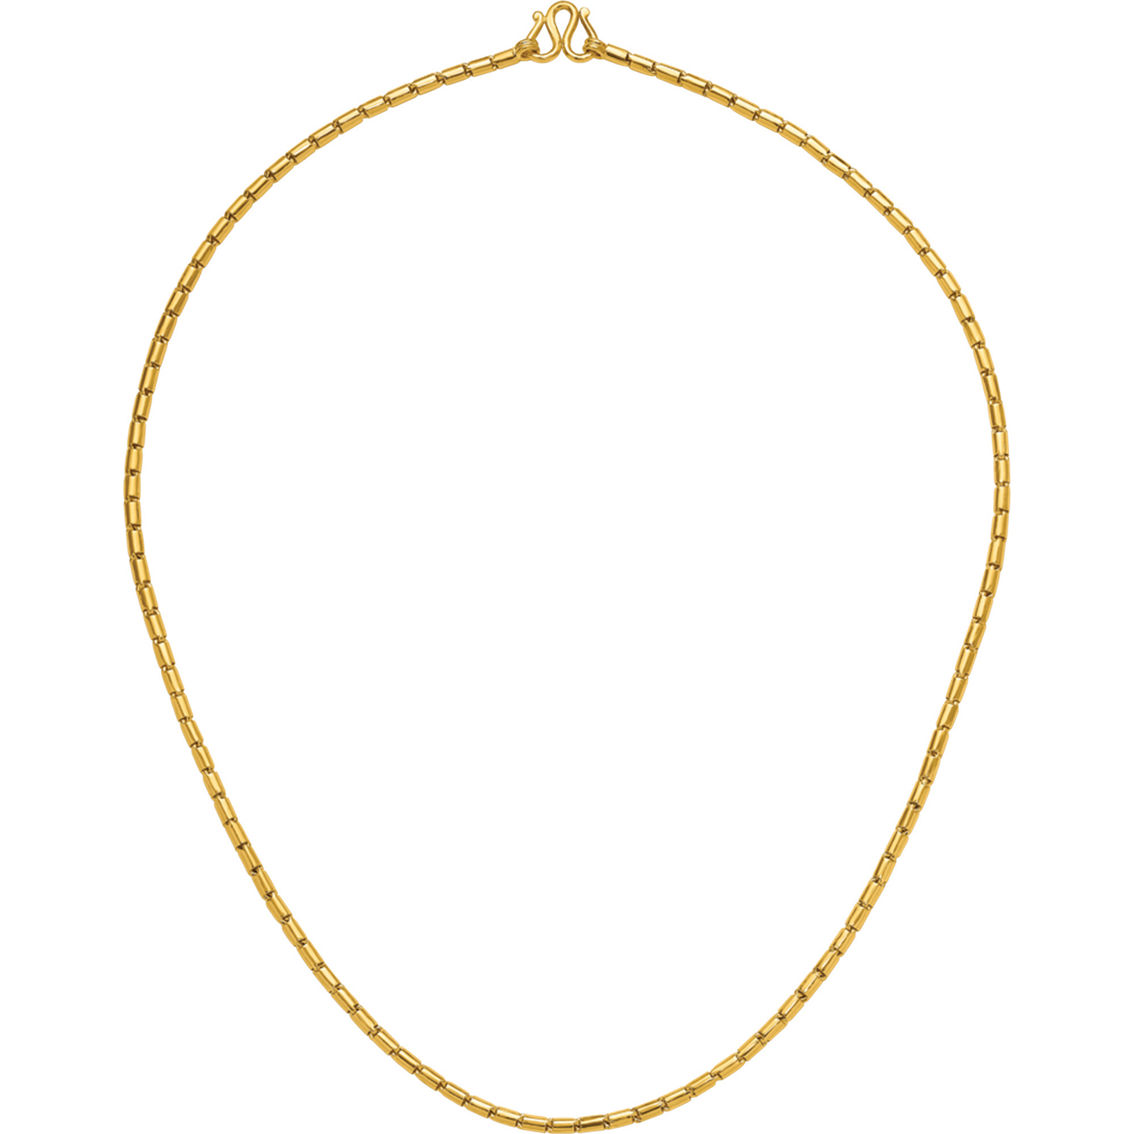 24K Pure Gold 24K Yellow Gold 3.2mm Solid Medium Round Barrel Link 18 in. Chain - Image 3 of 5